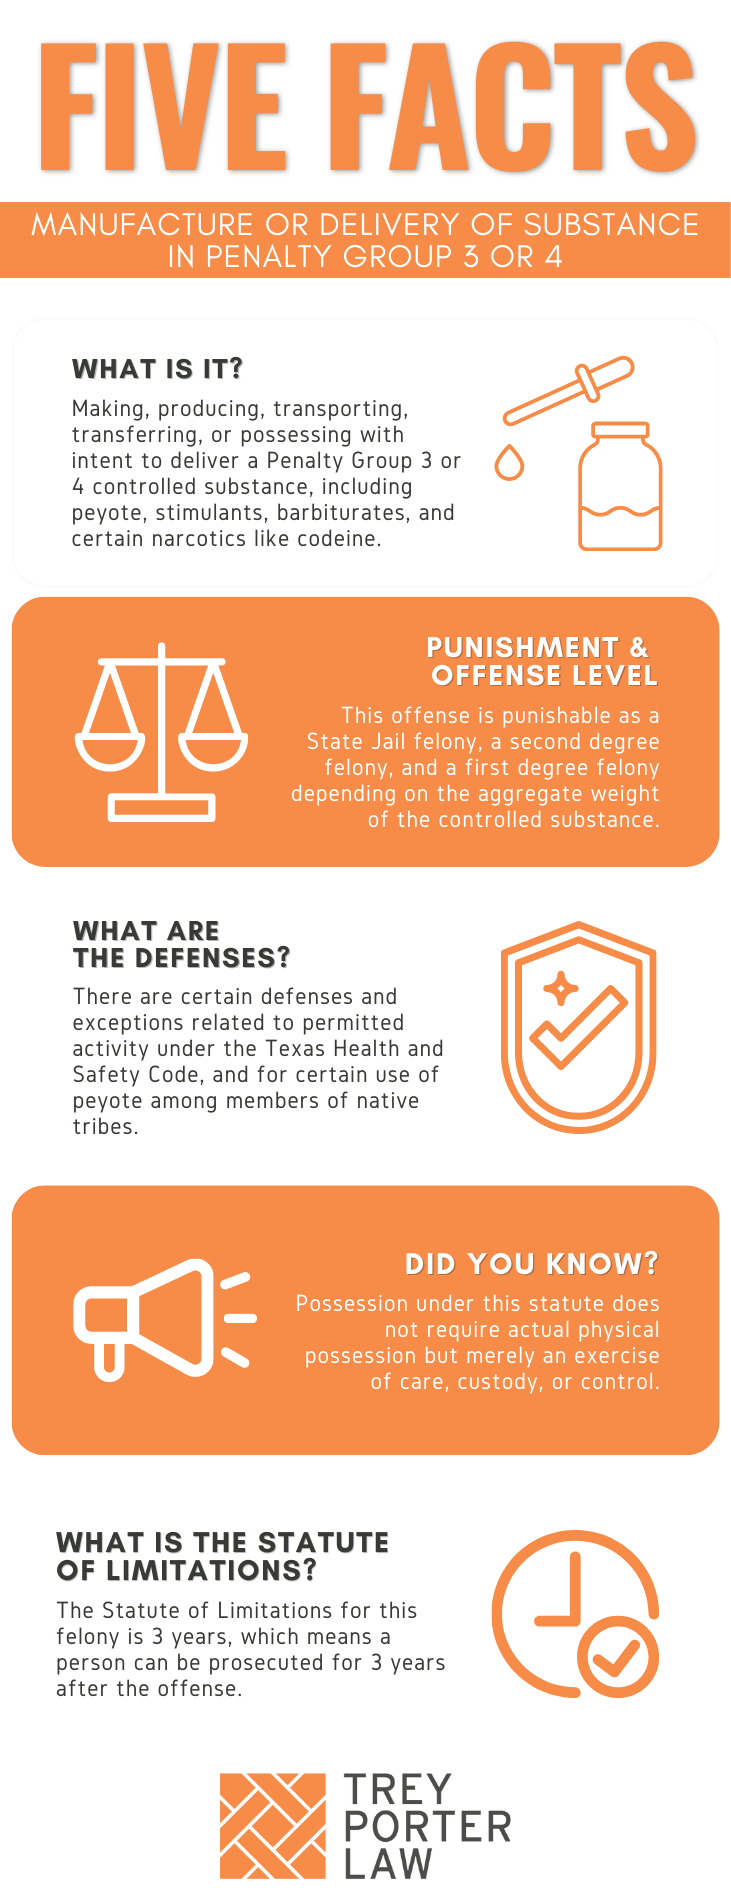 Texas Health & Safety Code Offenses 481.114 – Manufacture or Delivery of Substance in Penalty Group 3 or 4